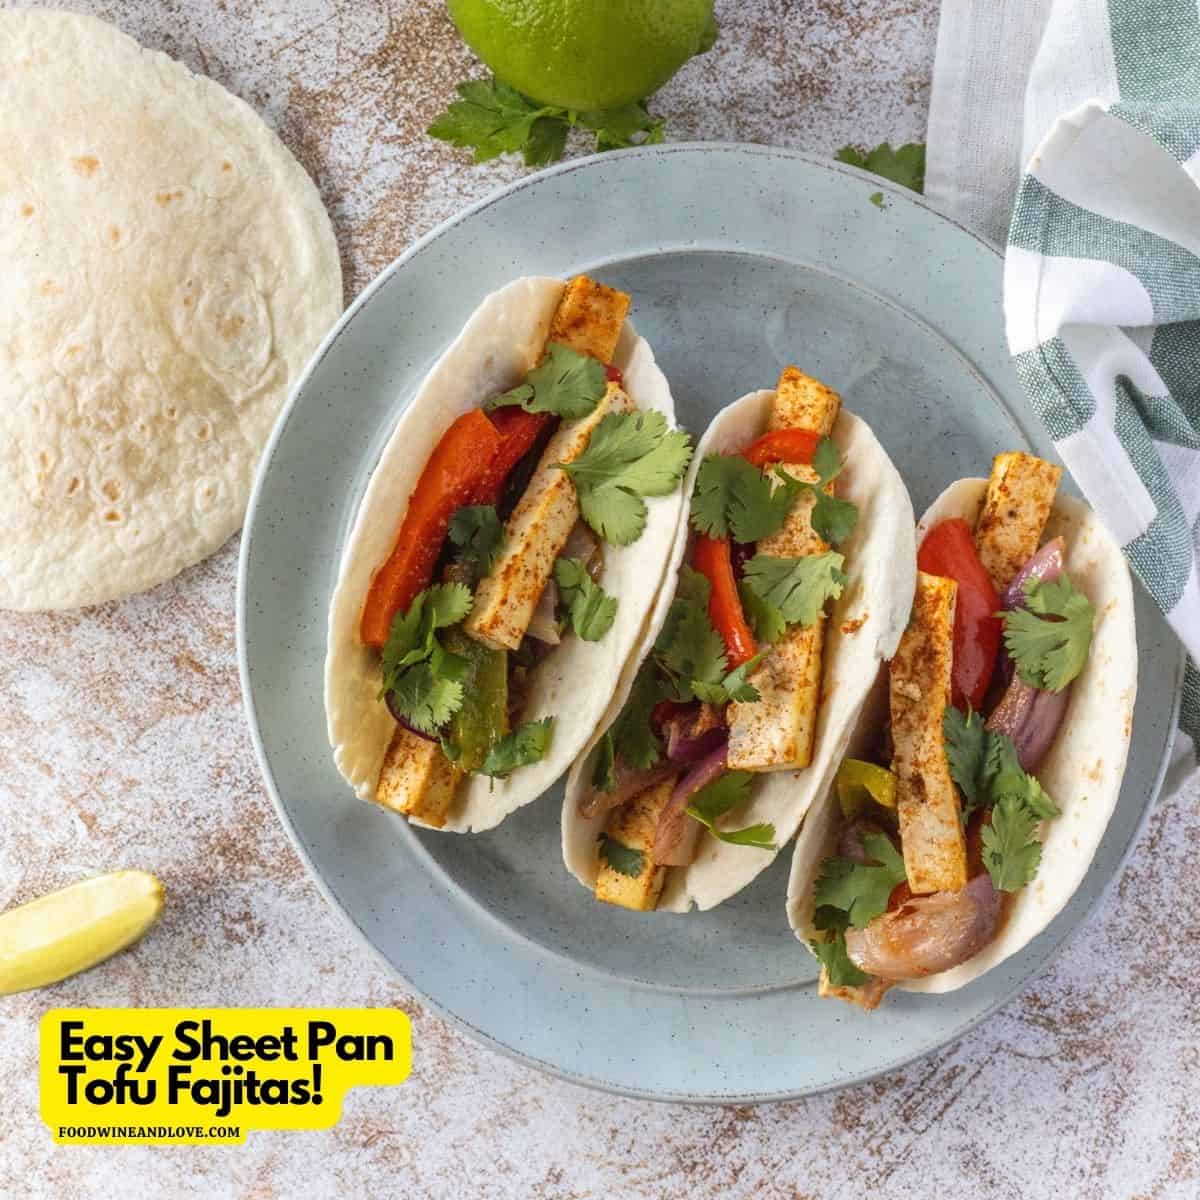 Easy Tofu Sheet Pan Fajitas (Vegan MedDiet), a simple and delicious 30 minute dinner recipe made with healthy ingredients.